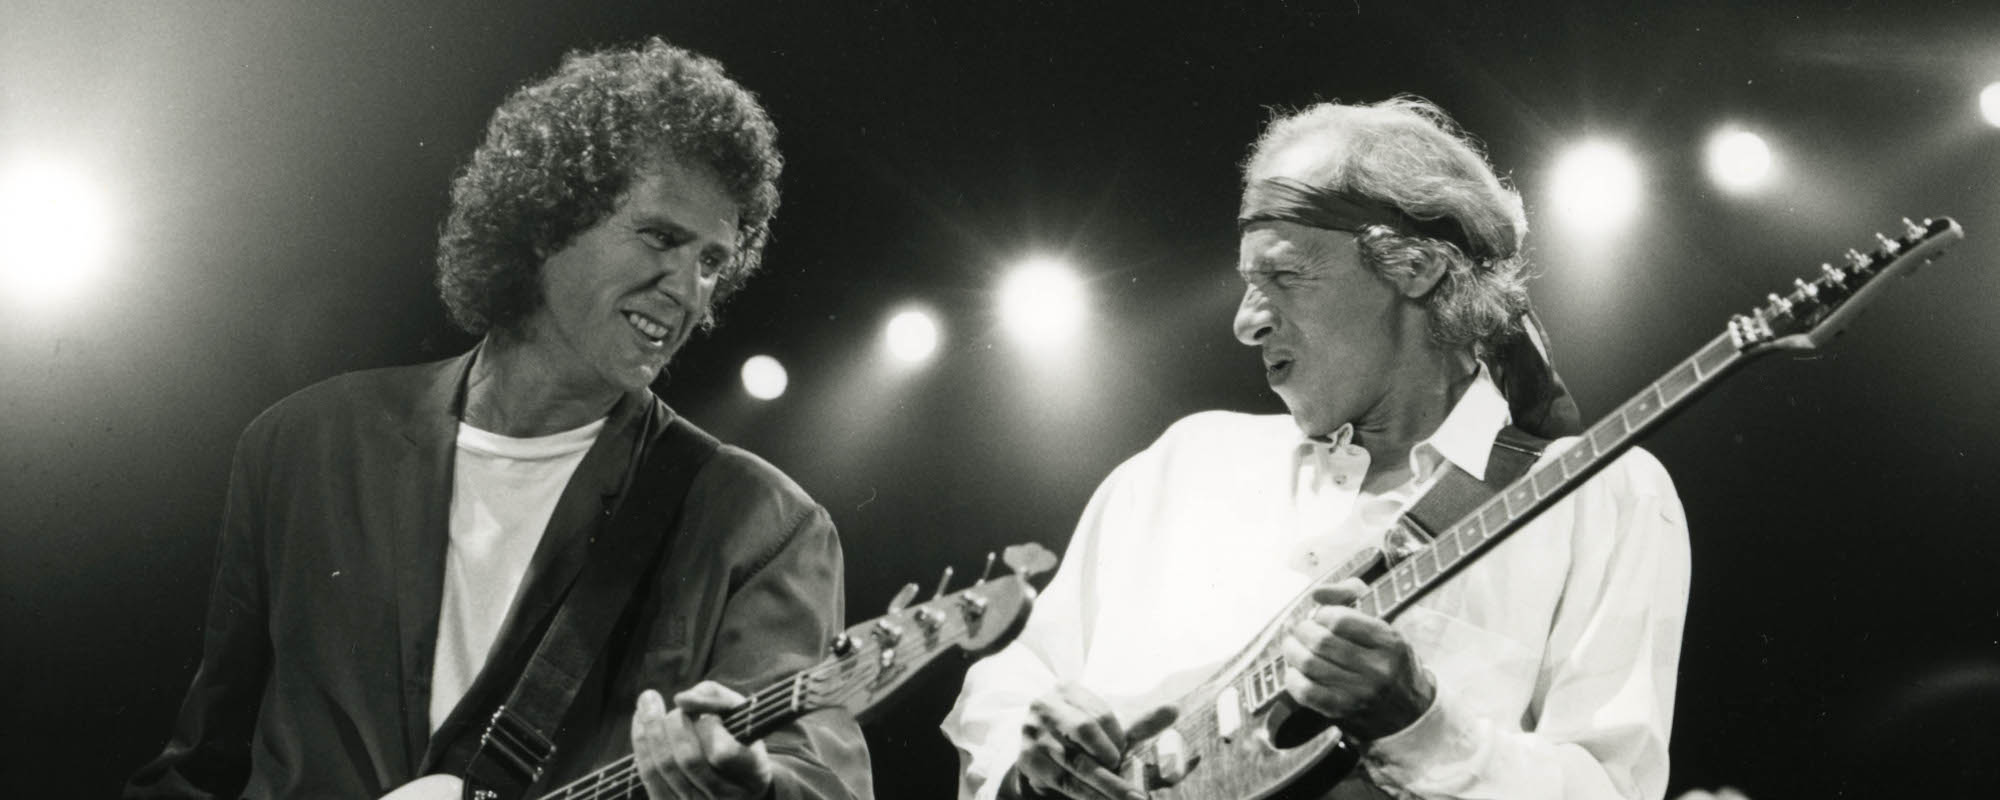 Behind the Band Name: Dire Straits - American Songwriter